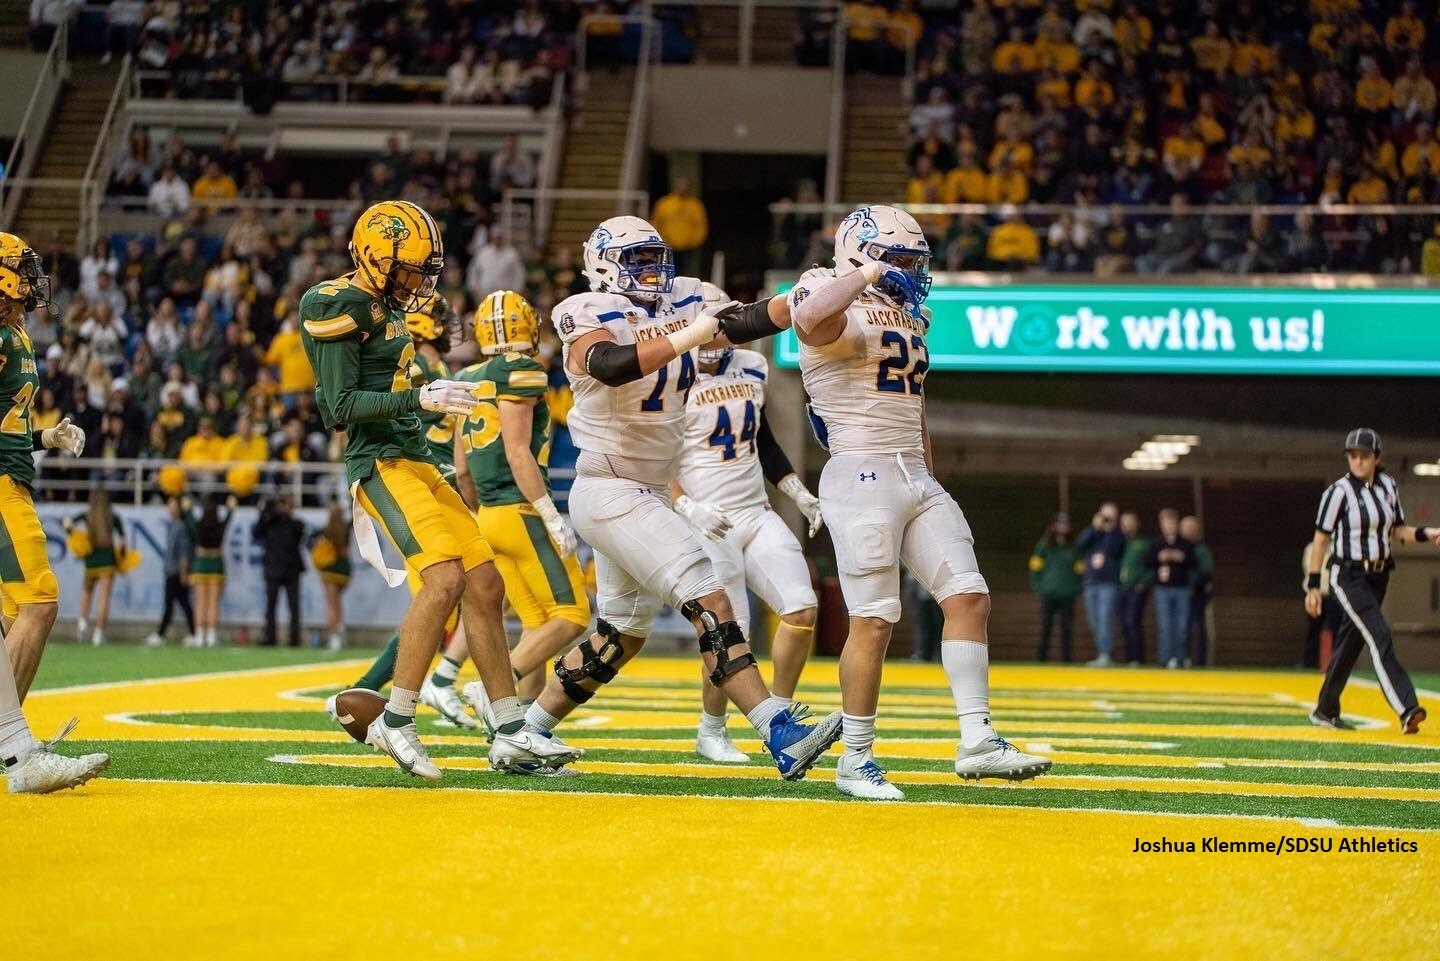 Jackrabbits Are Hopping: No. 1 in Stats Perform FCS Top 25 For the First Time